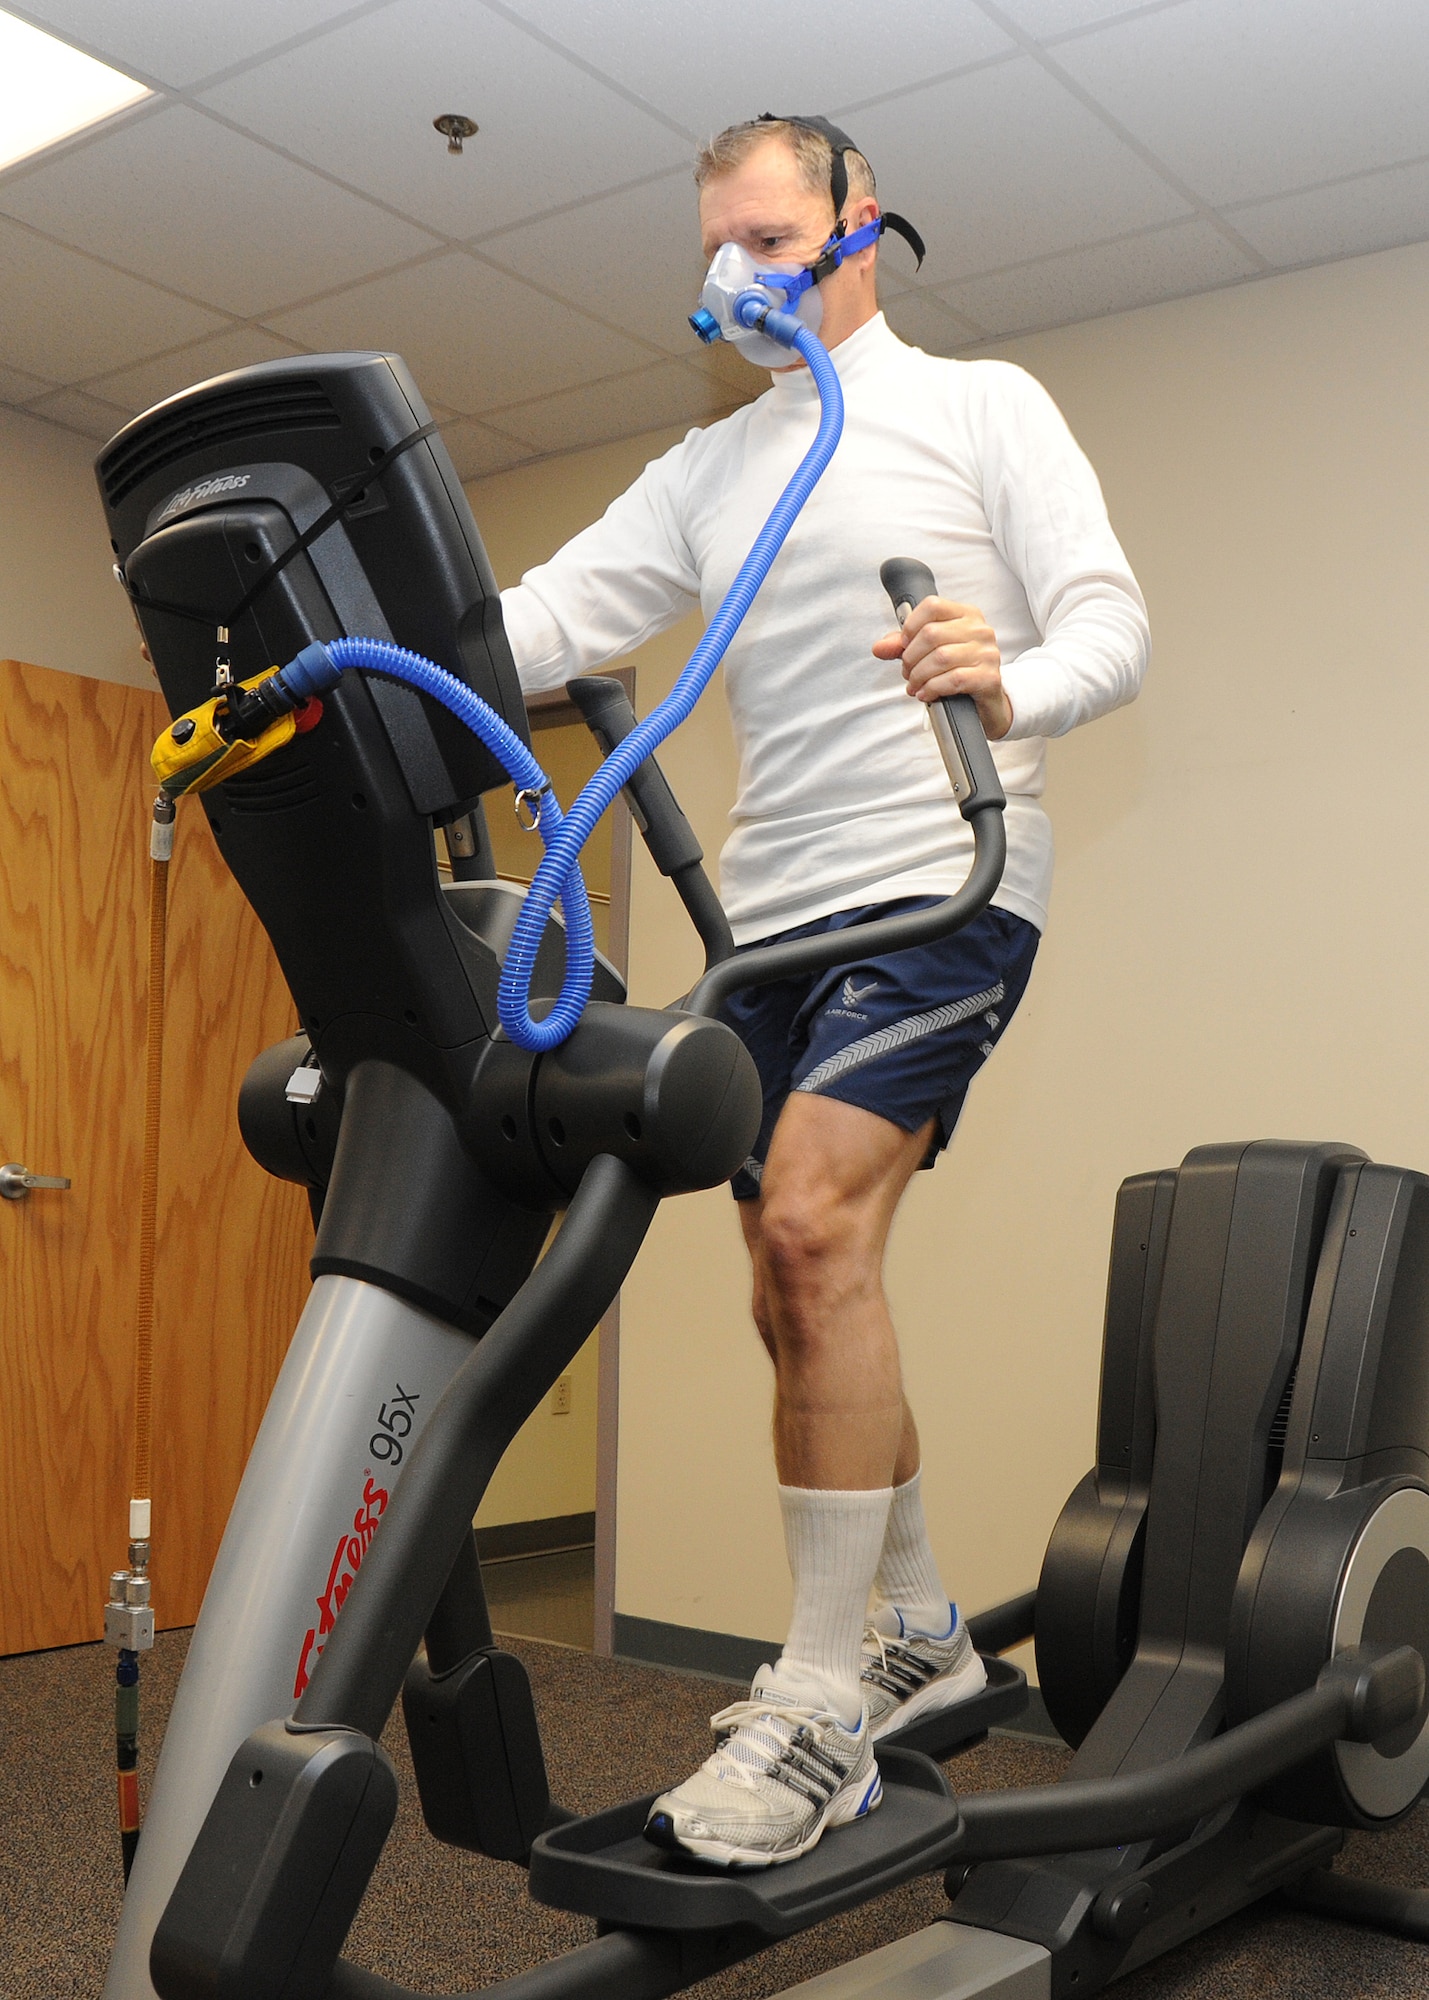 Gen. William M. Fraser III, commander of Air Combat Command, exercises on an elliptical machine at Beale Air Force Base, Calif., Jan. 10 prior to suiting up for a high-altitude chamber session. The 10-minute workout helps to expedite the removal of nitrogen in the body. (U.S. Air Force photo/9th Reconnaissance Wing Public Affairs)